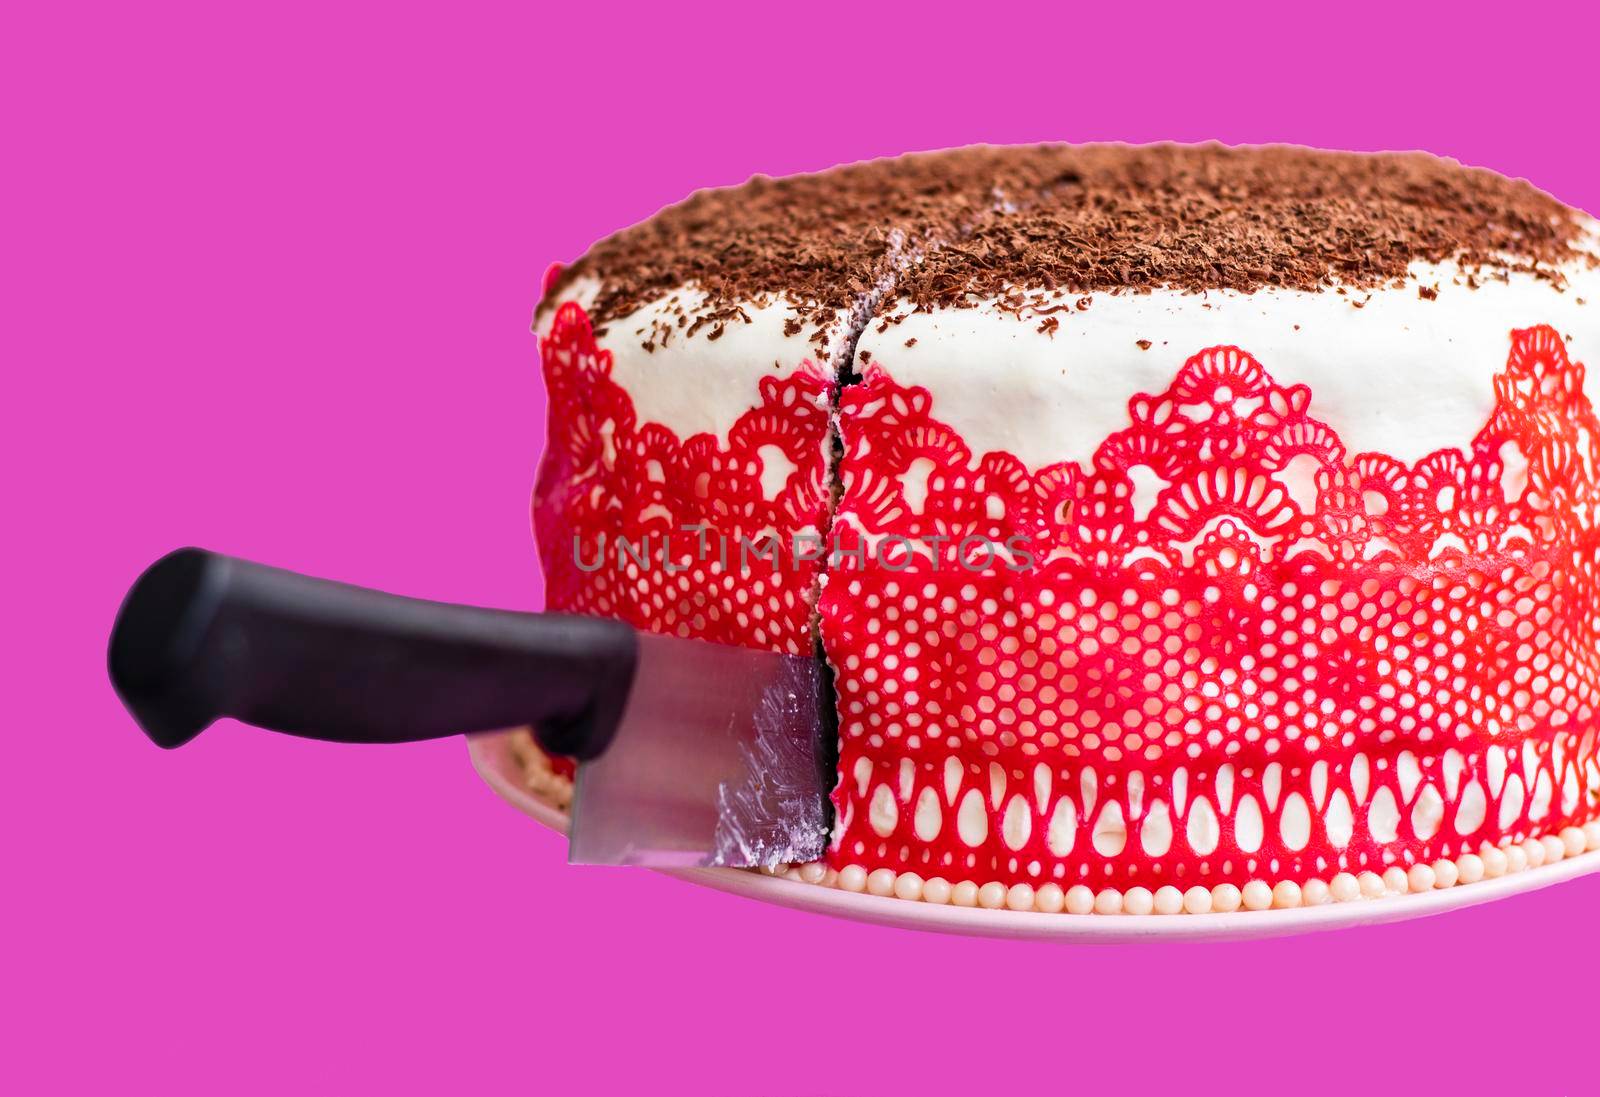 homemade cake with cream and red lace decorated with chocolate chips. The knife is ready to cut the cake. Flour dessert. Sweet cake ready to eat. pink background. High quality photo